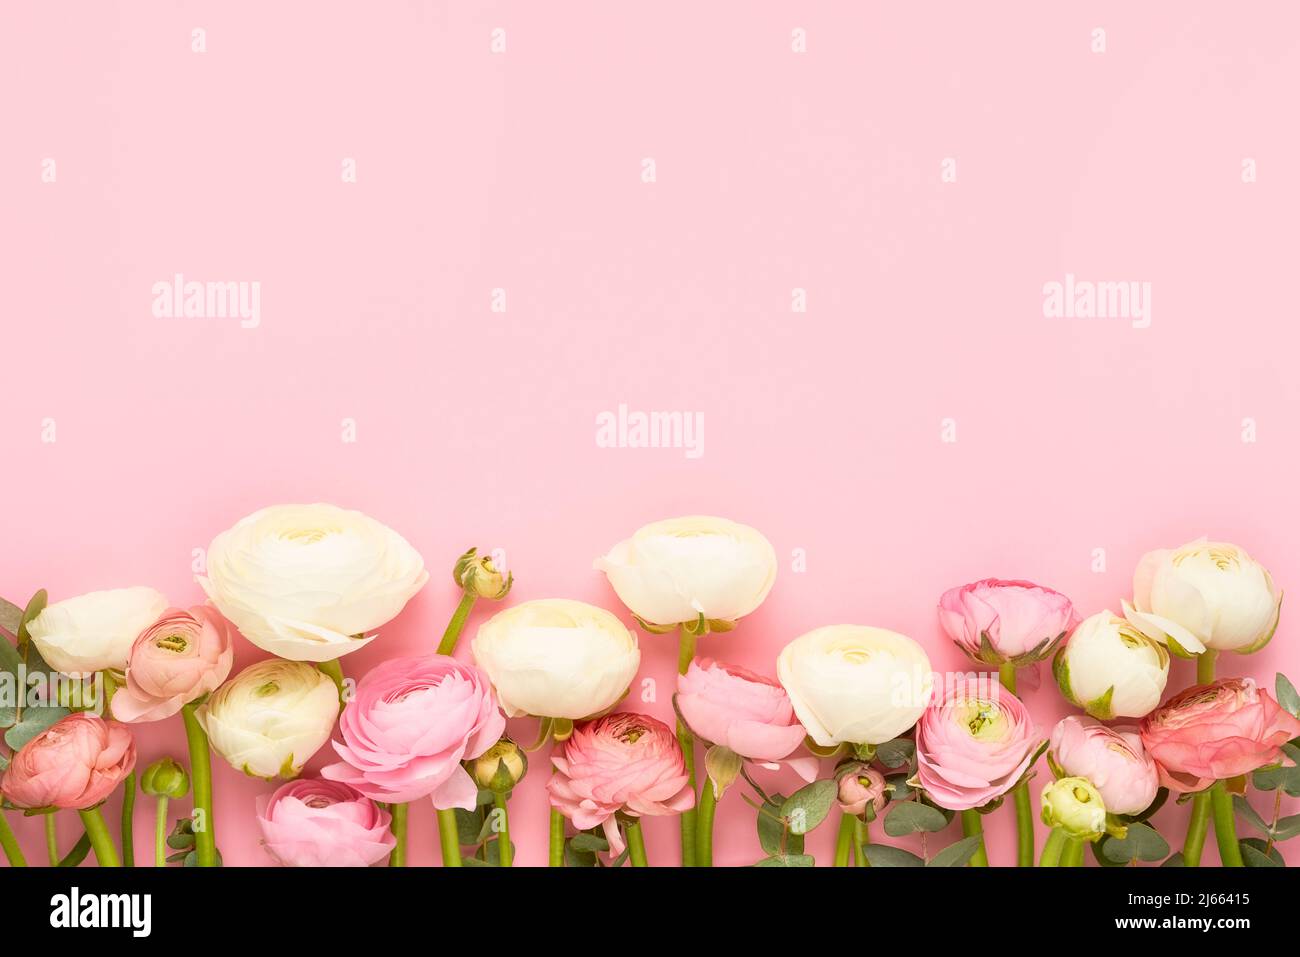 Border of beautiful ranunculus flowers on a pink background. Mothers Day, Valentines Day, birthday concept. Top view, copy space for text Stock Photo